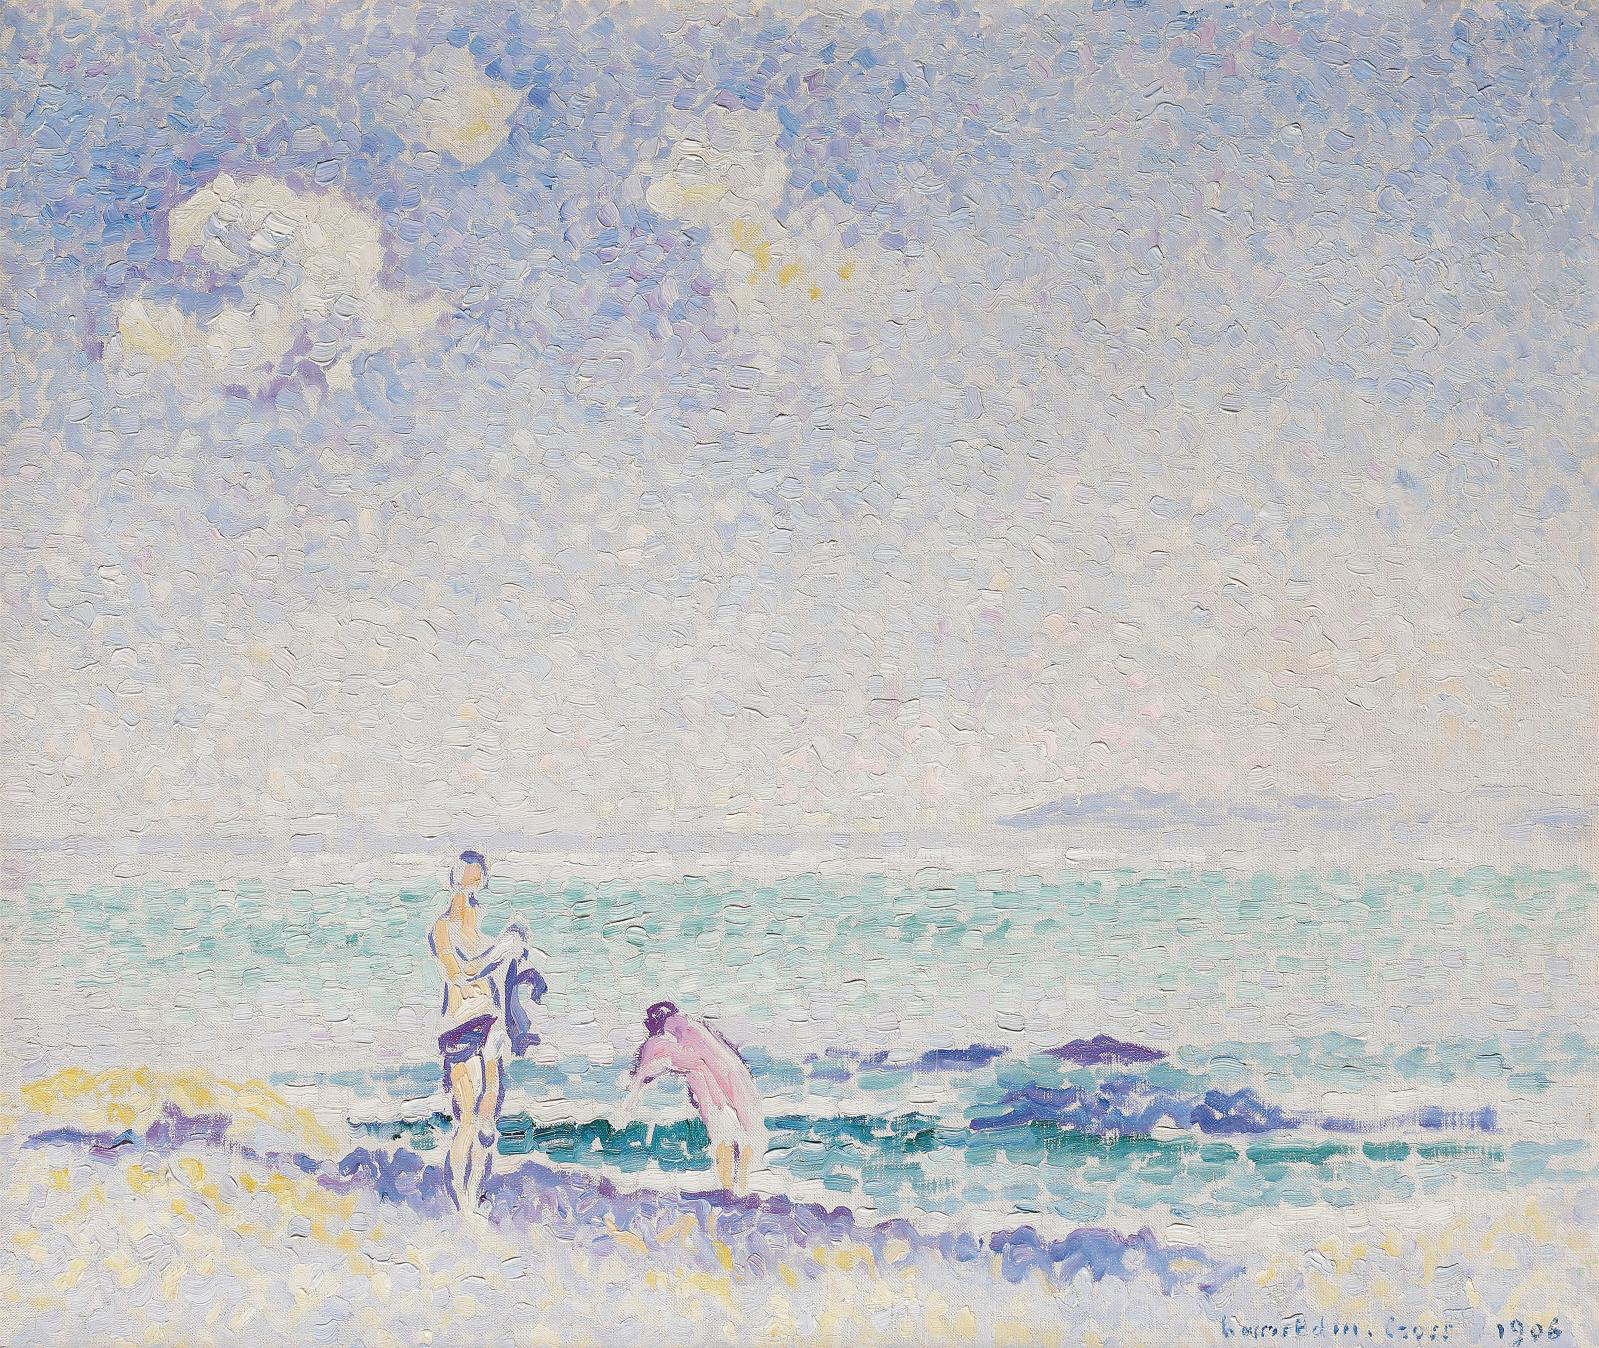 Maurice Denis and Edmond Cross: A Pictorial Journey Through France 